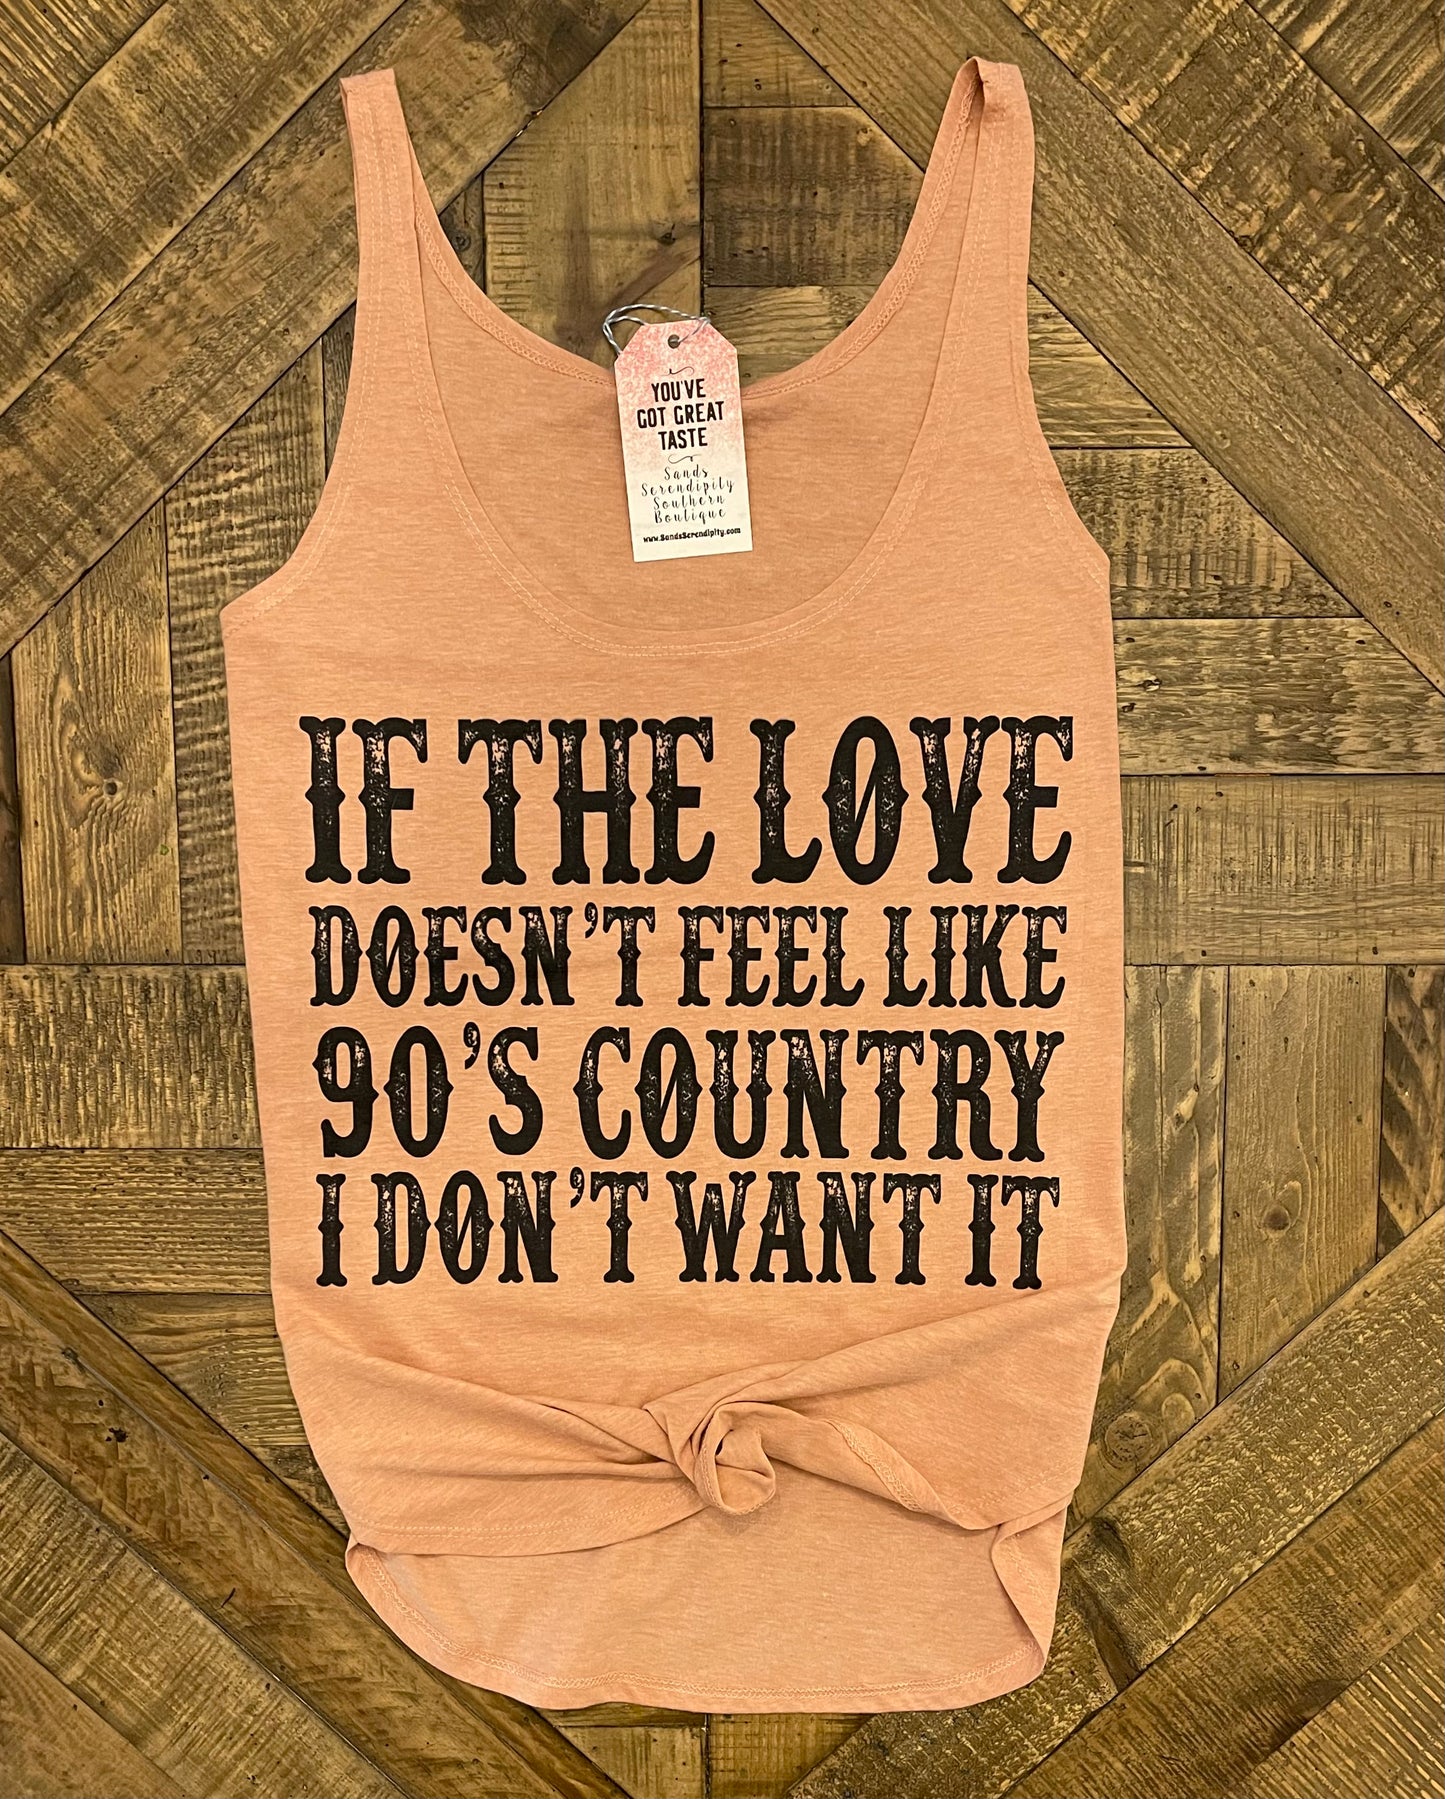 If The Love Doesn’t Feel Like 90s Country I Don’t Want It 💗 - Sands Serendipity Boutique